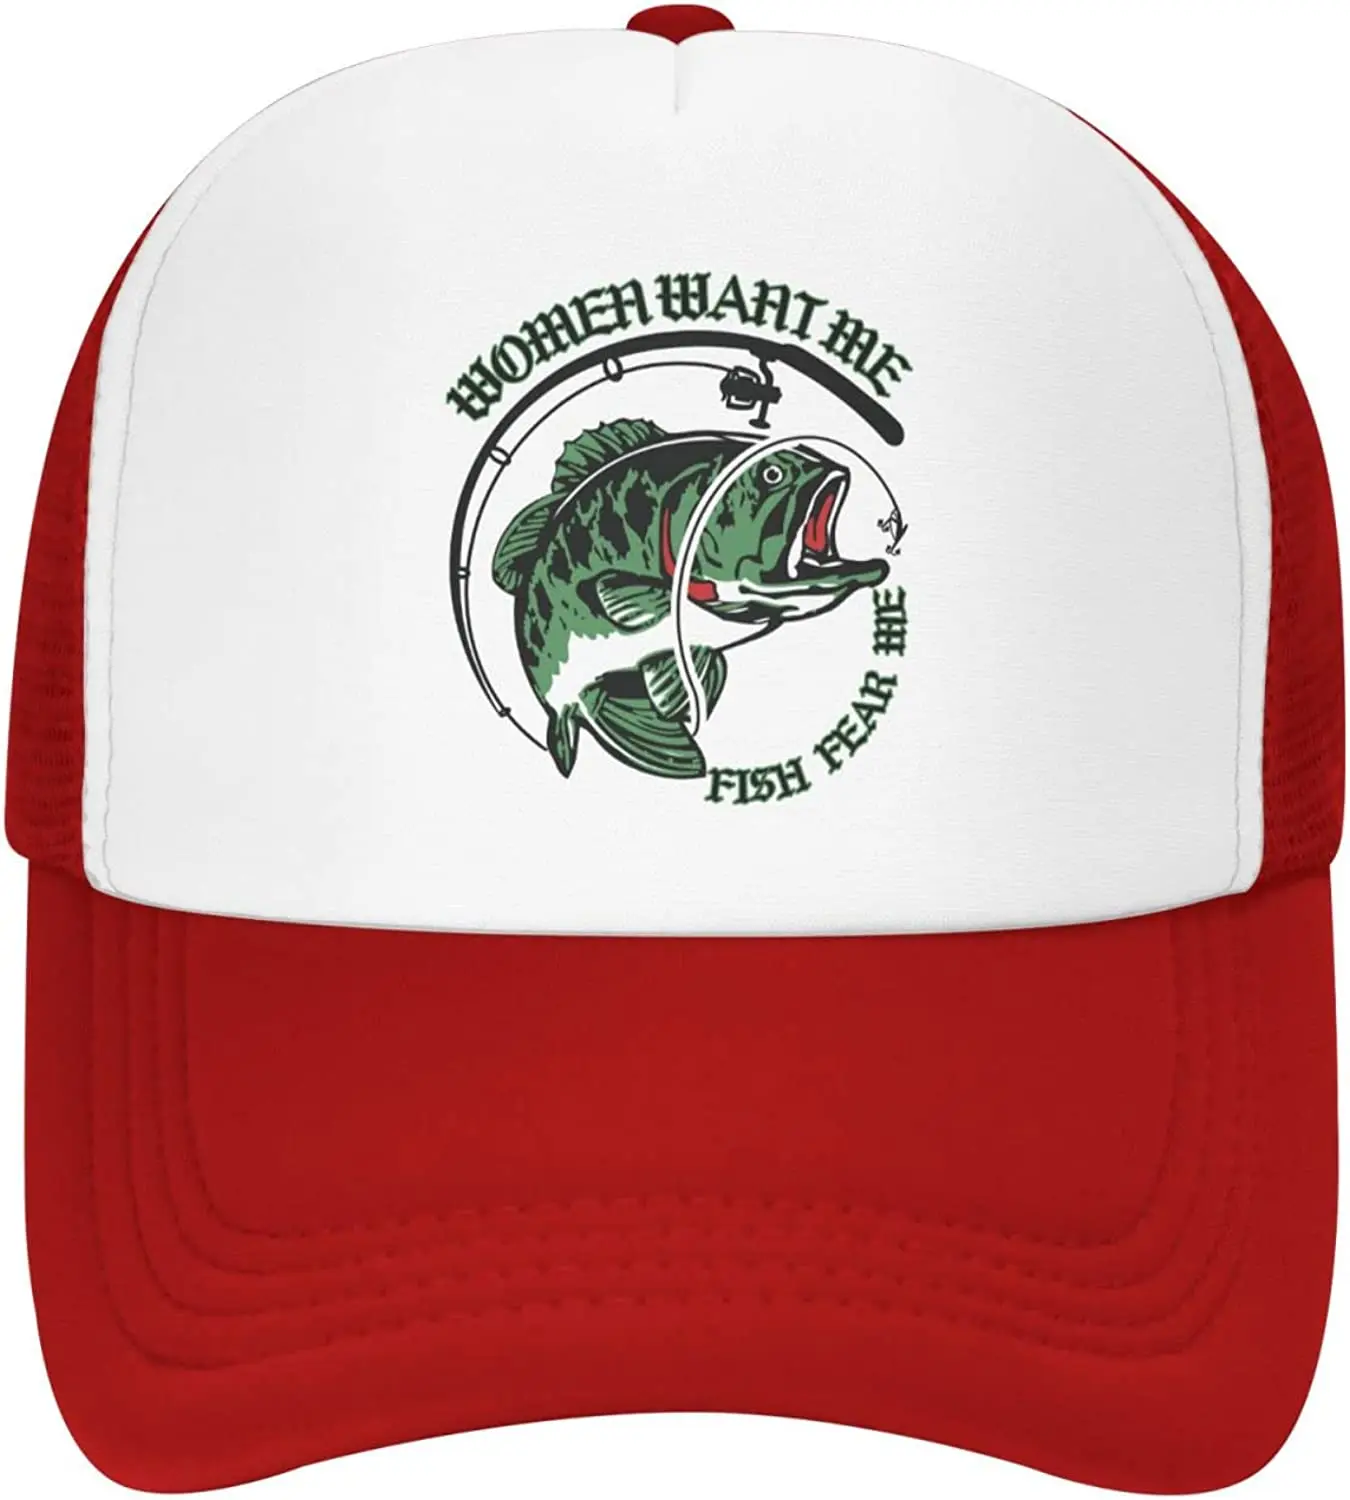 Women Want Me Fish Fear Me Funny Fishing Hat for Men Women, Trucker Hat, Sports Baseball Cap with Casual Adjustable Snapback